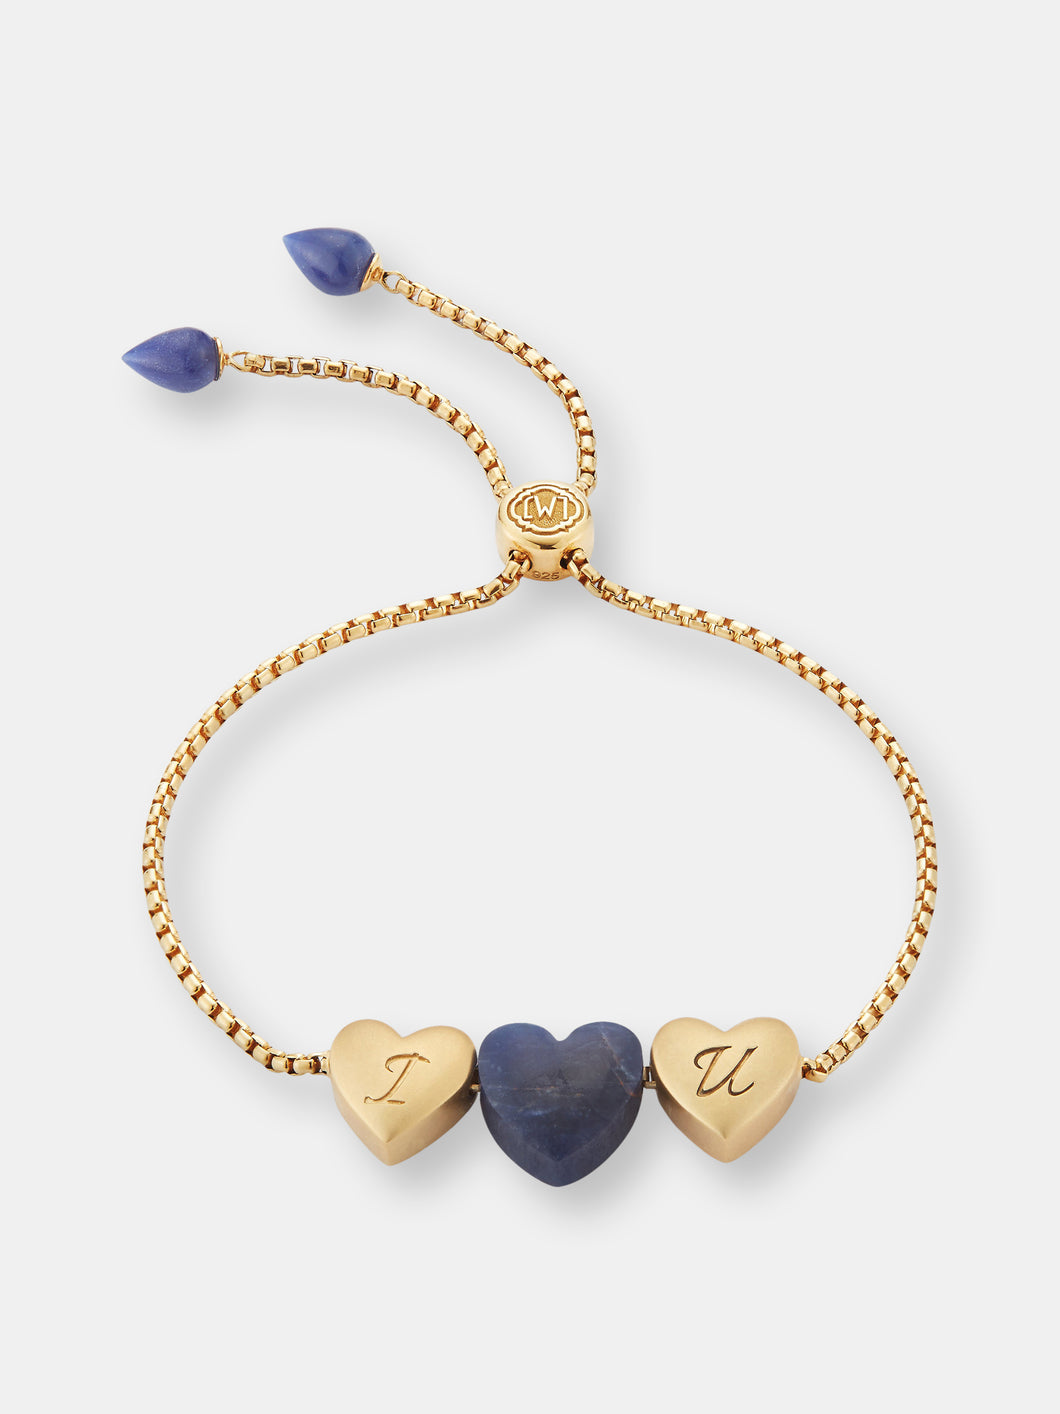 Luv Me Sodalite Bolo Adjustable I Love You Heart Bracelet in 14K Yellow Gold Plated Sterling Silver